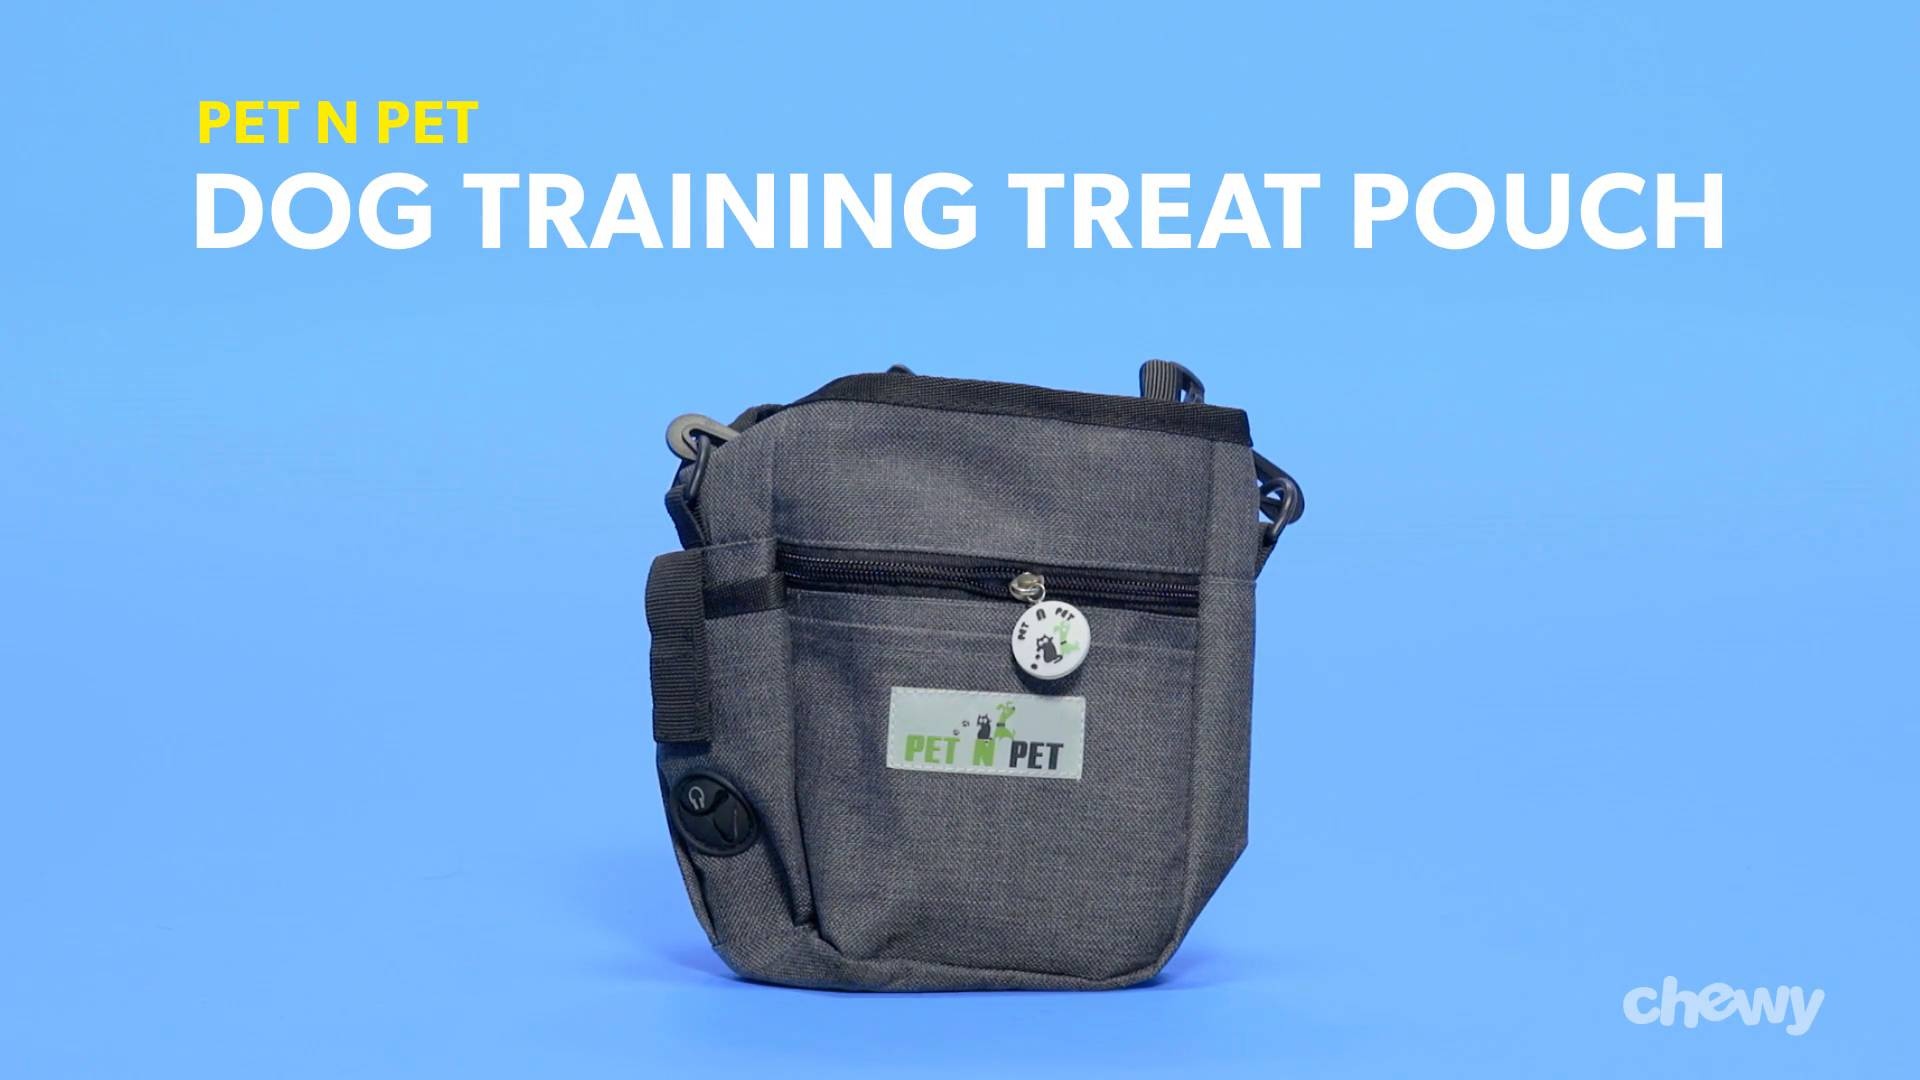 Treat Pouch Dog Treat Holding Bag for Training by Outward Hound 